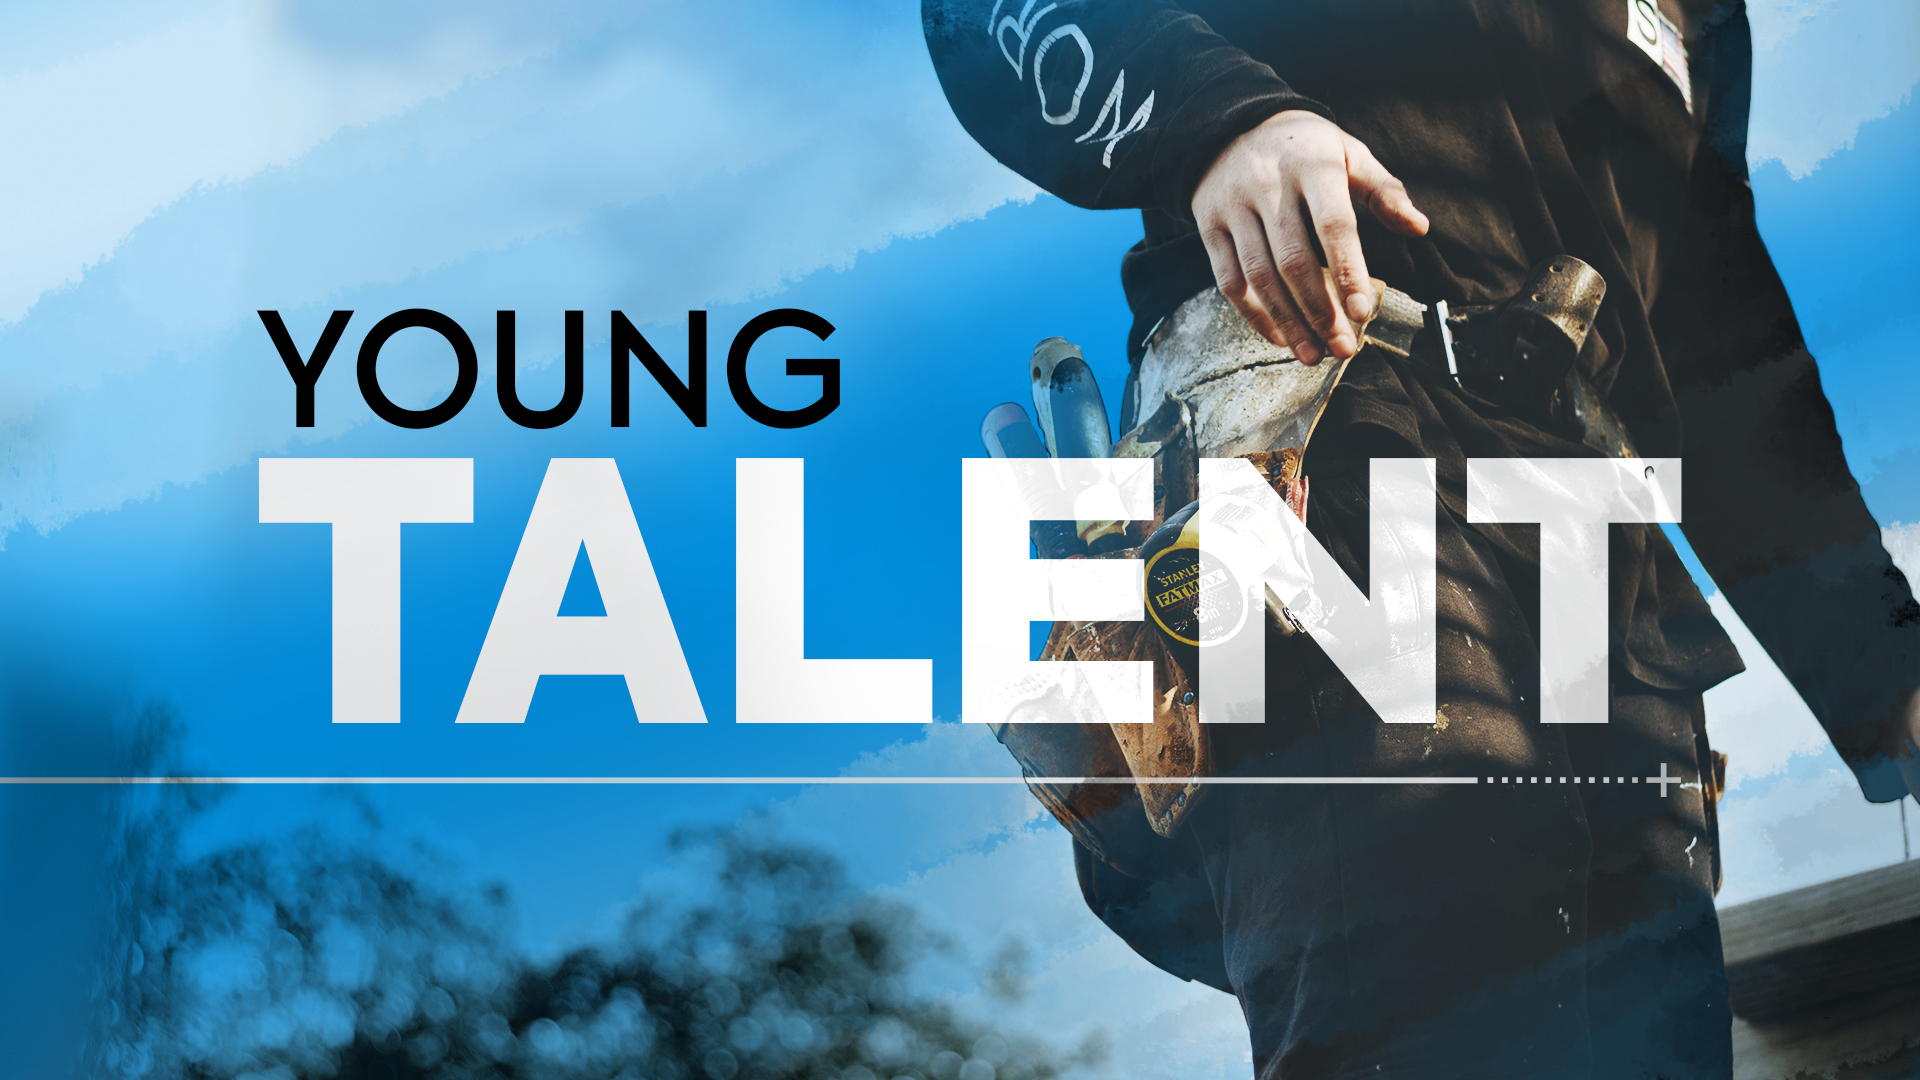 recruiting young talent text with a man needed for contractors jobs